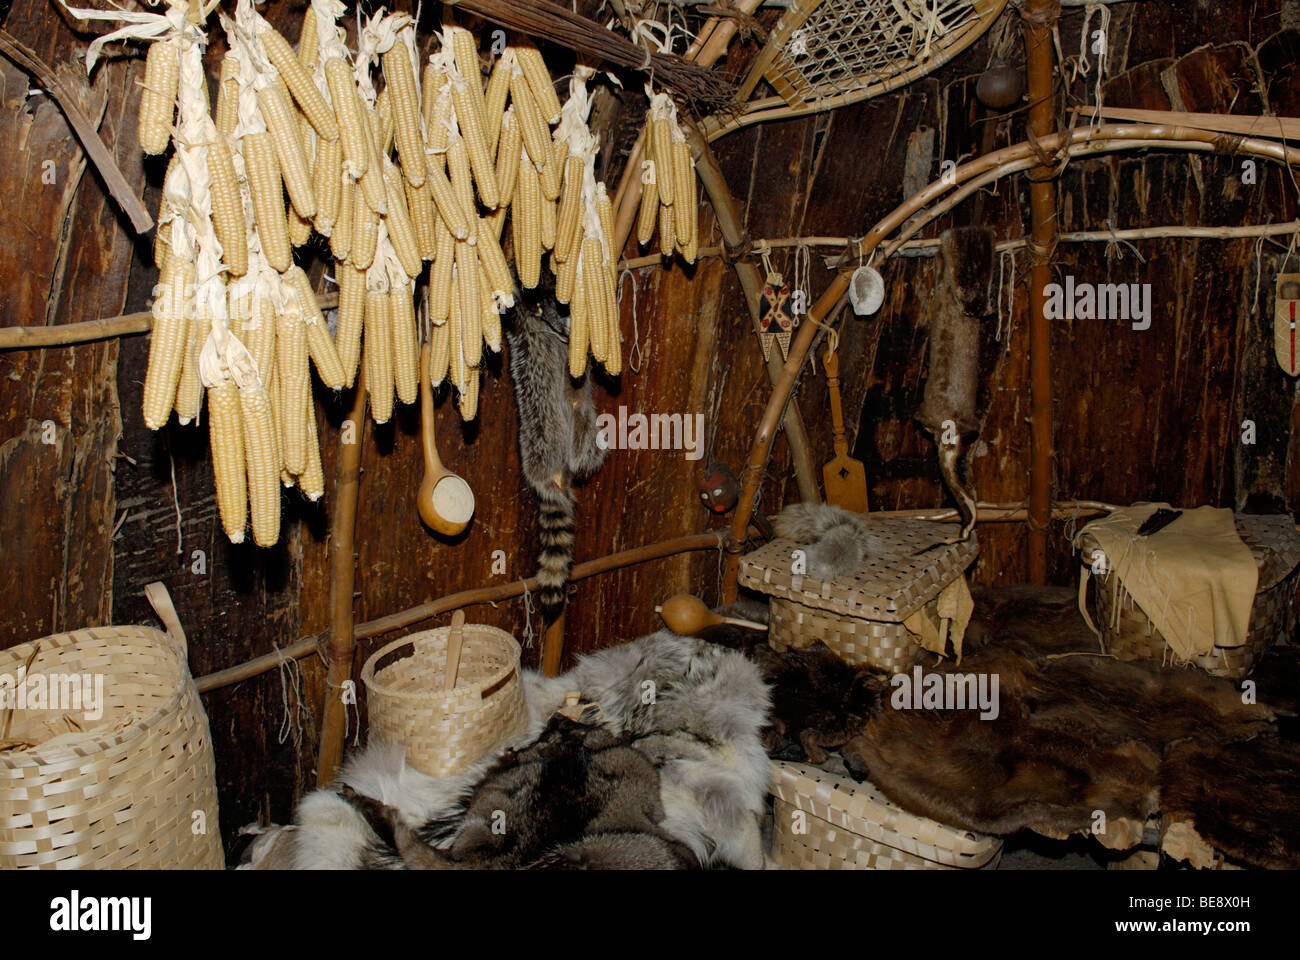 Inside of a Native American teepee lodge, Mashantucket Pequots, 16th Century, with drying corn, tools, skins Stock Photo